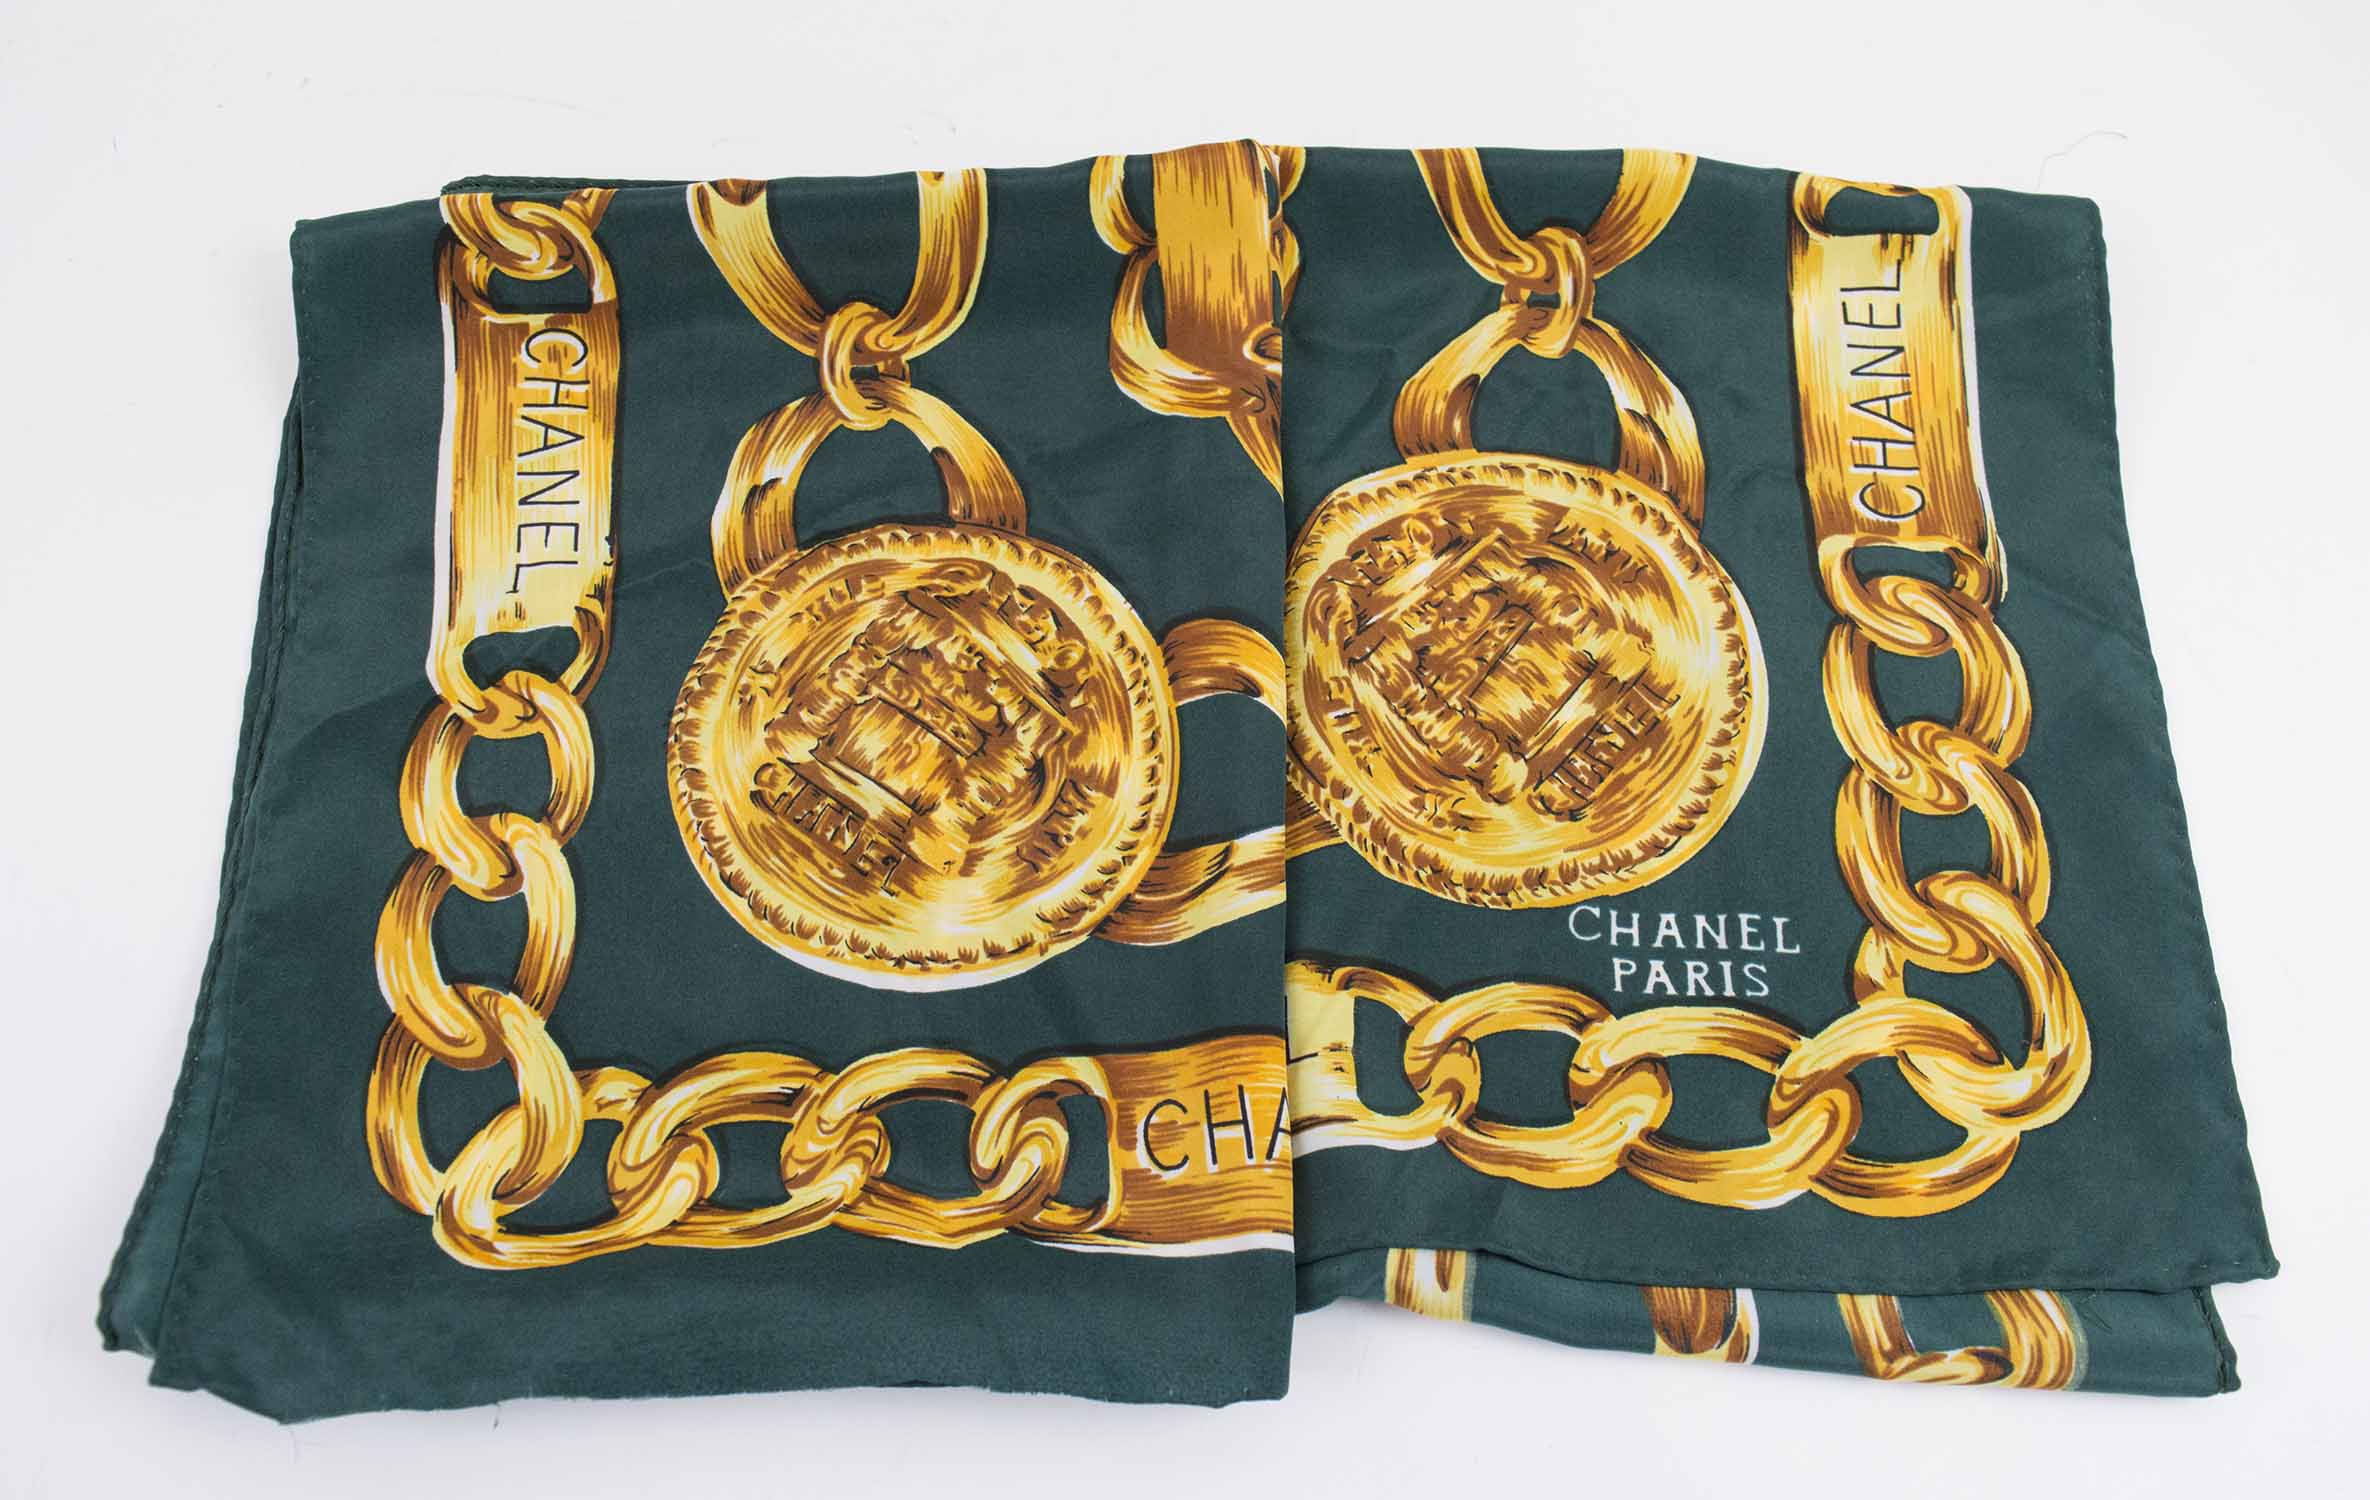 CHANEL RUE CAMBON VINTAGE SCARF, green with golden chain links pattern,  circa 1990s, silk, 86cm x 86cm.